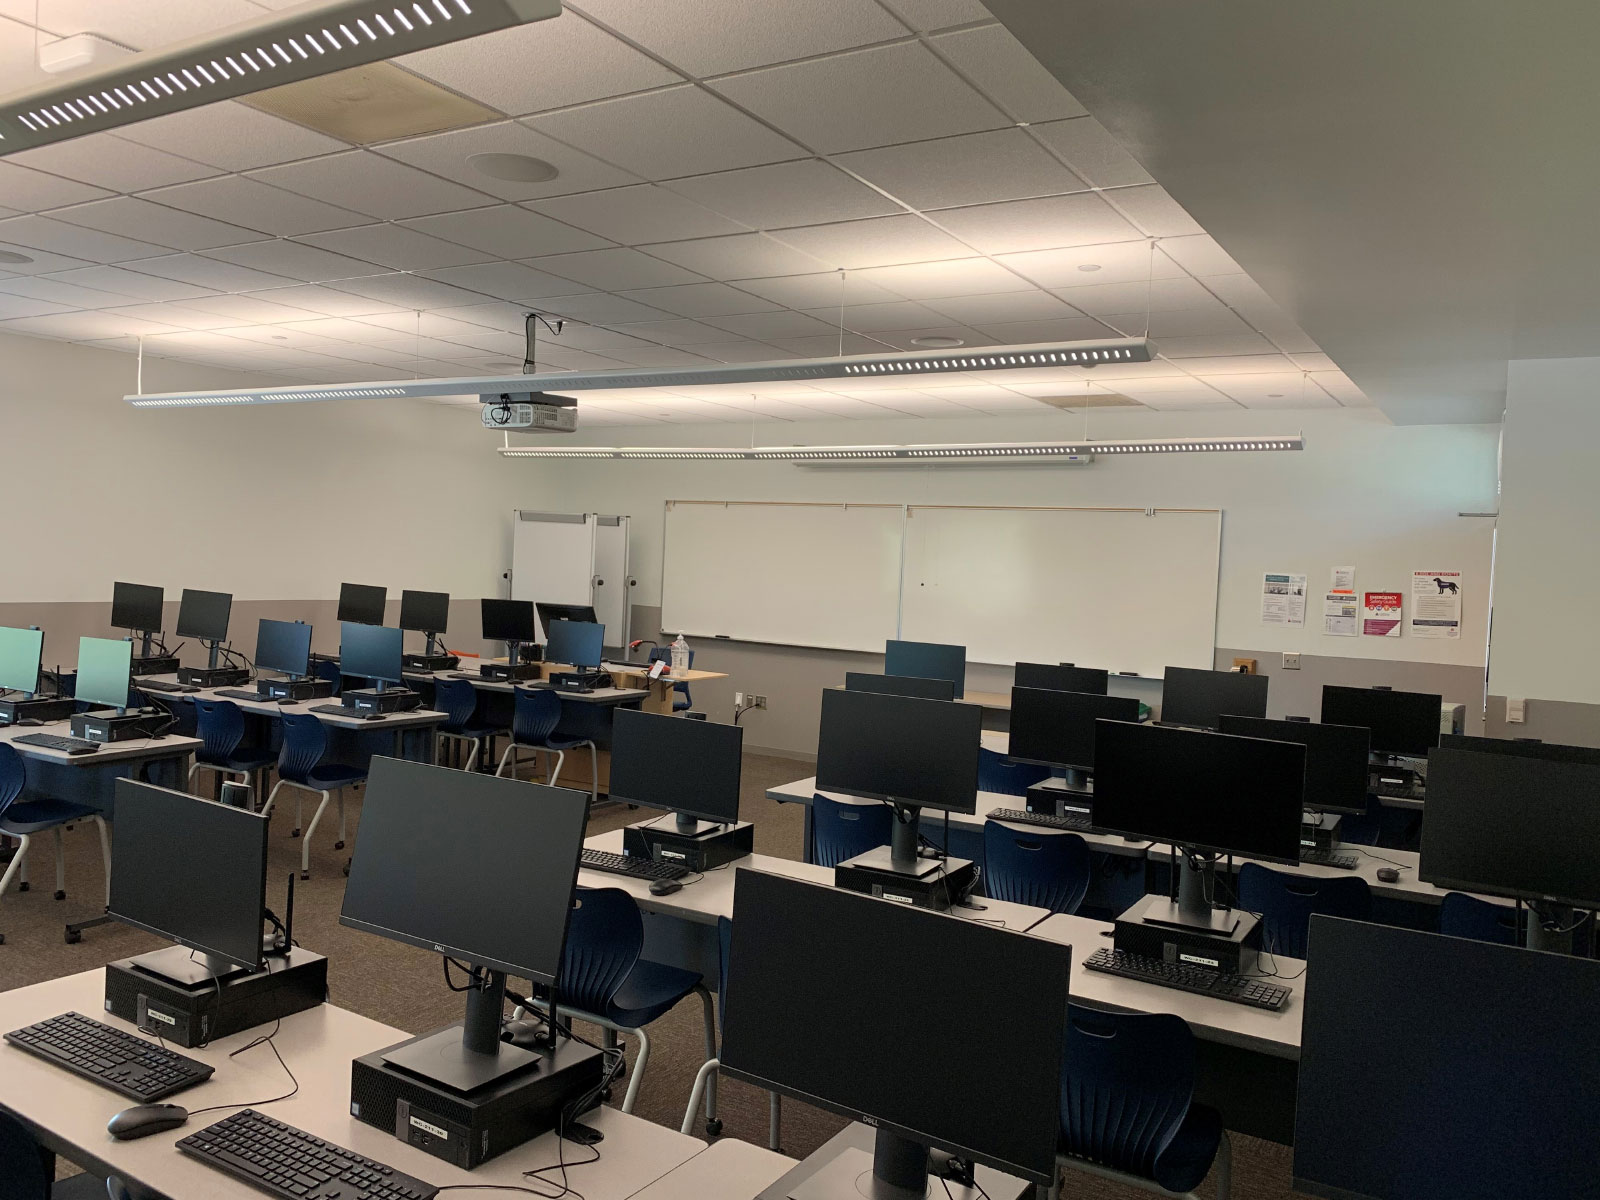 Angled front view of rows of computers on desks in Wilsonville's Computer Lab W211